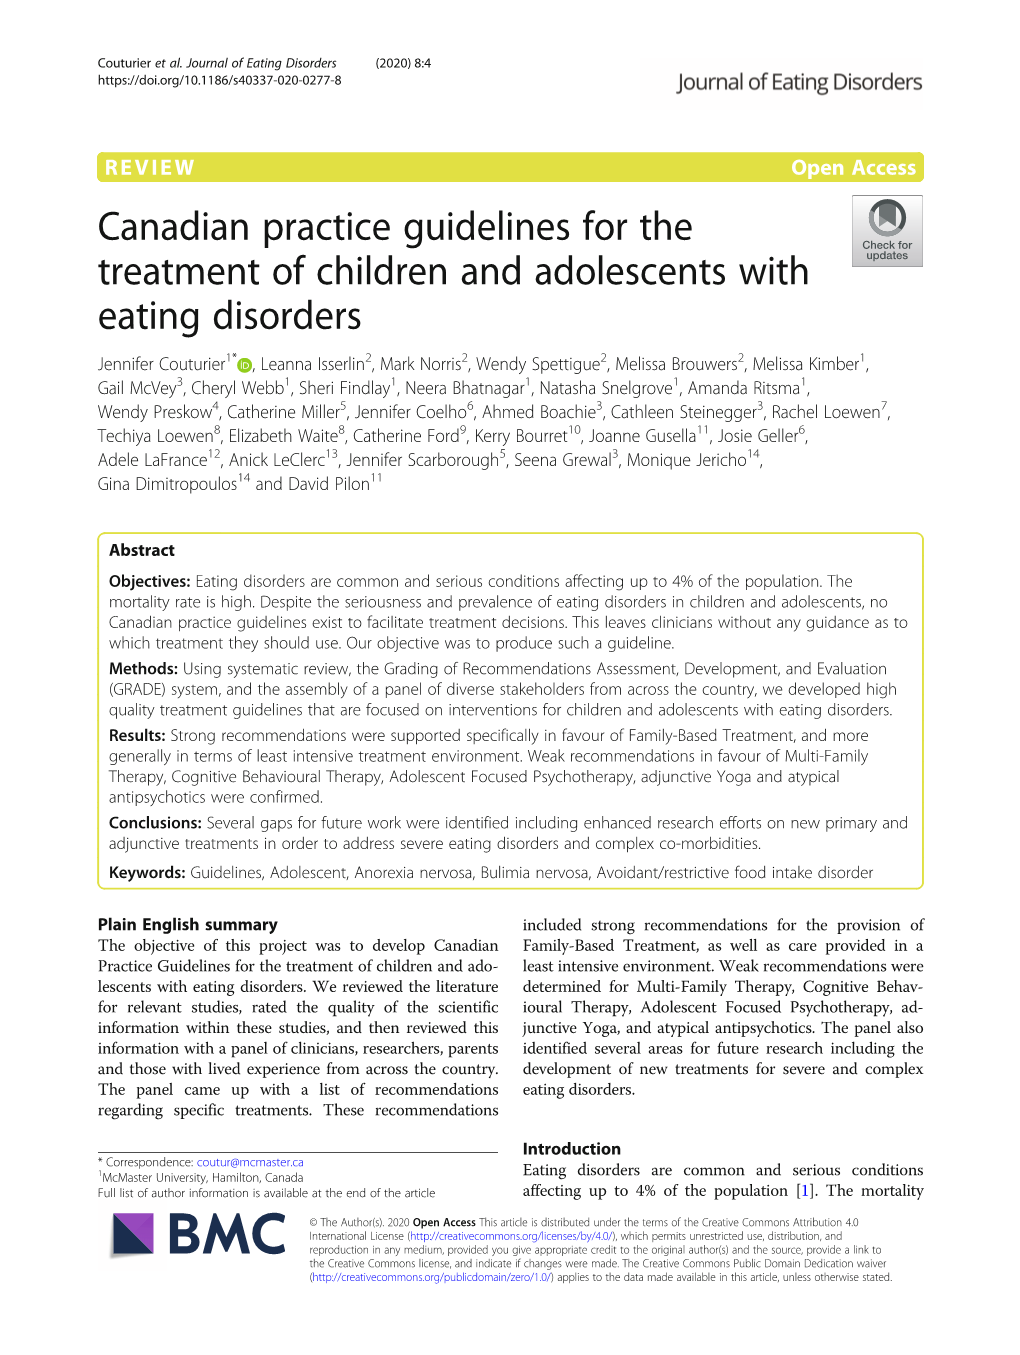 Canadian Practice Guidelines for the Treatment of Children And